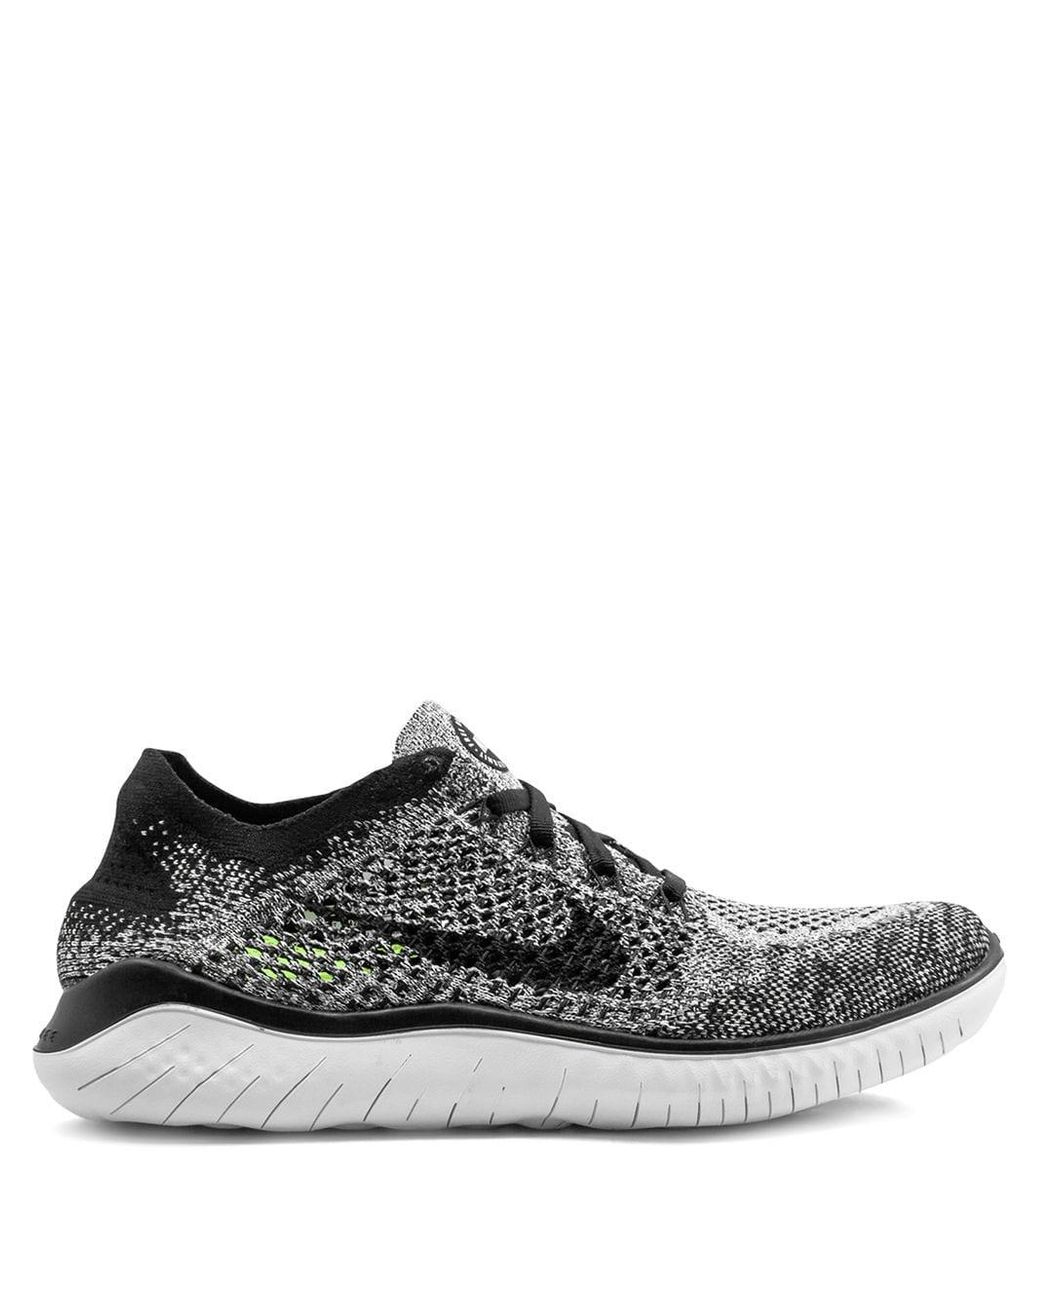 Nike Free Rn Flyknit 2018 Running Shoes in White (Black) - Save ...